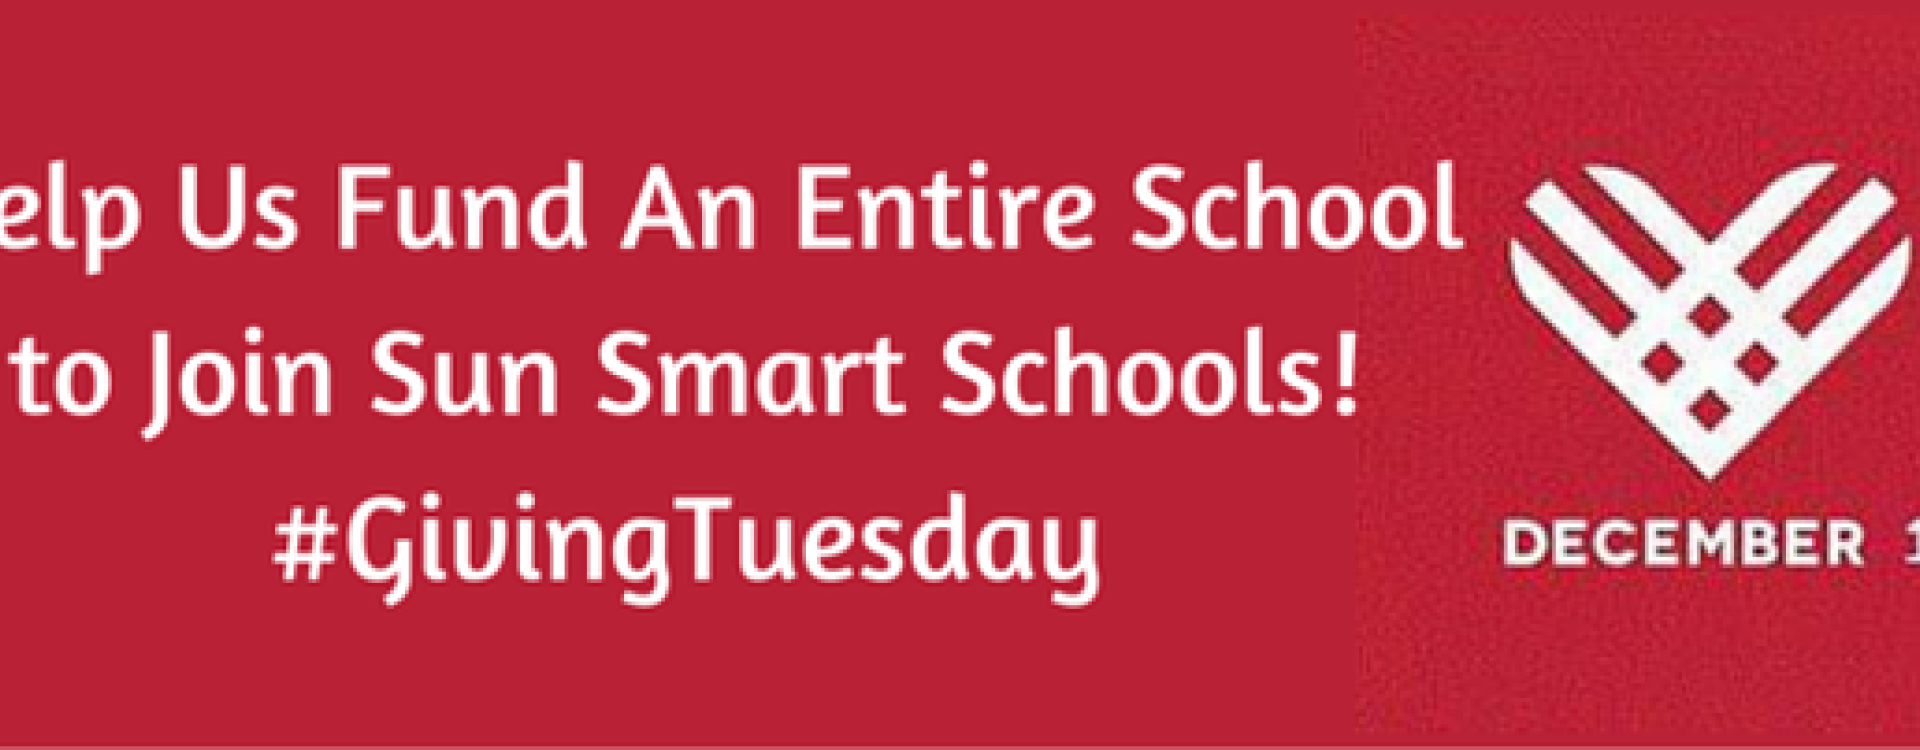 Giving-Tuesday-Lets-Fund-a-School